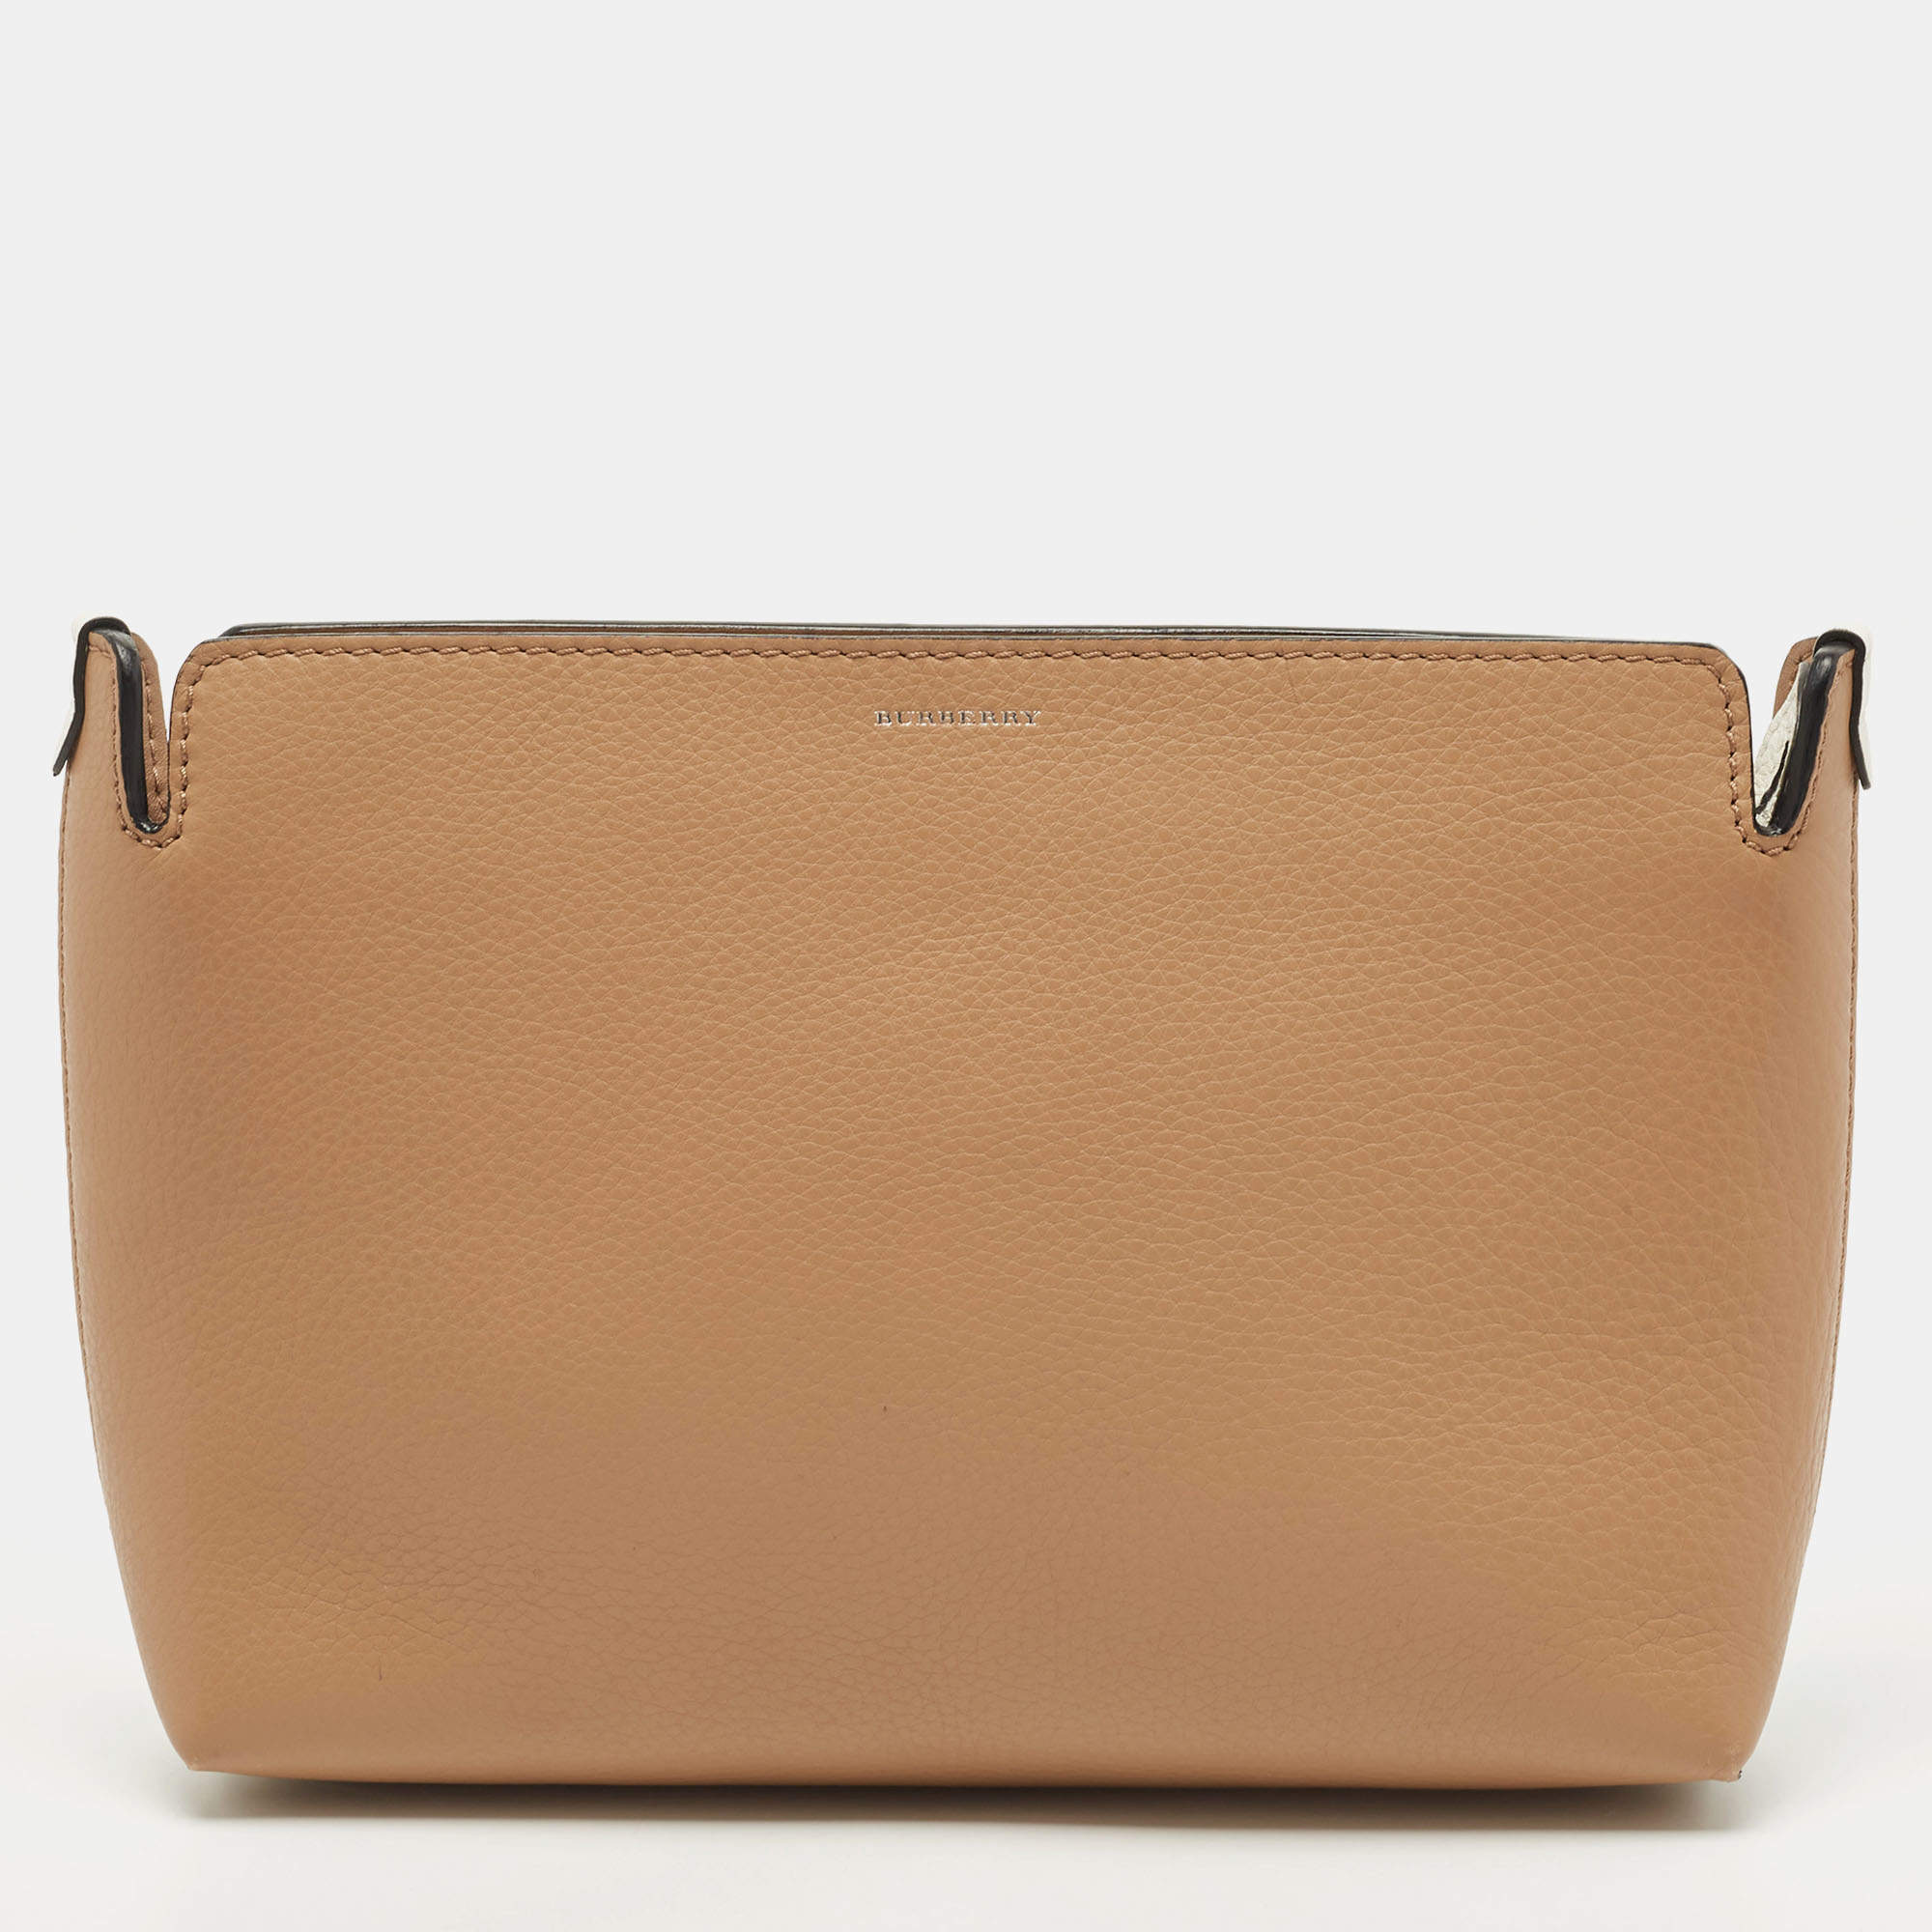 Burberry Women's Leather Clutch Bag